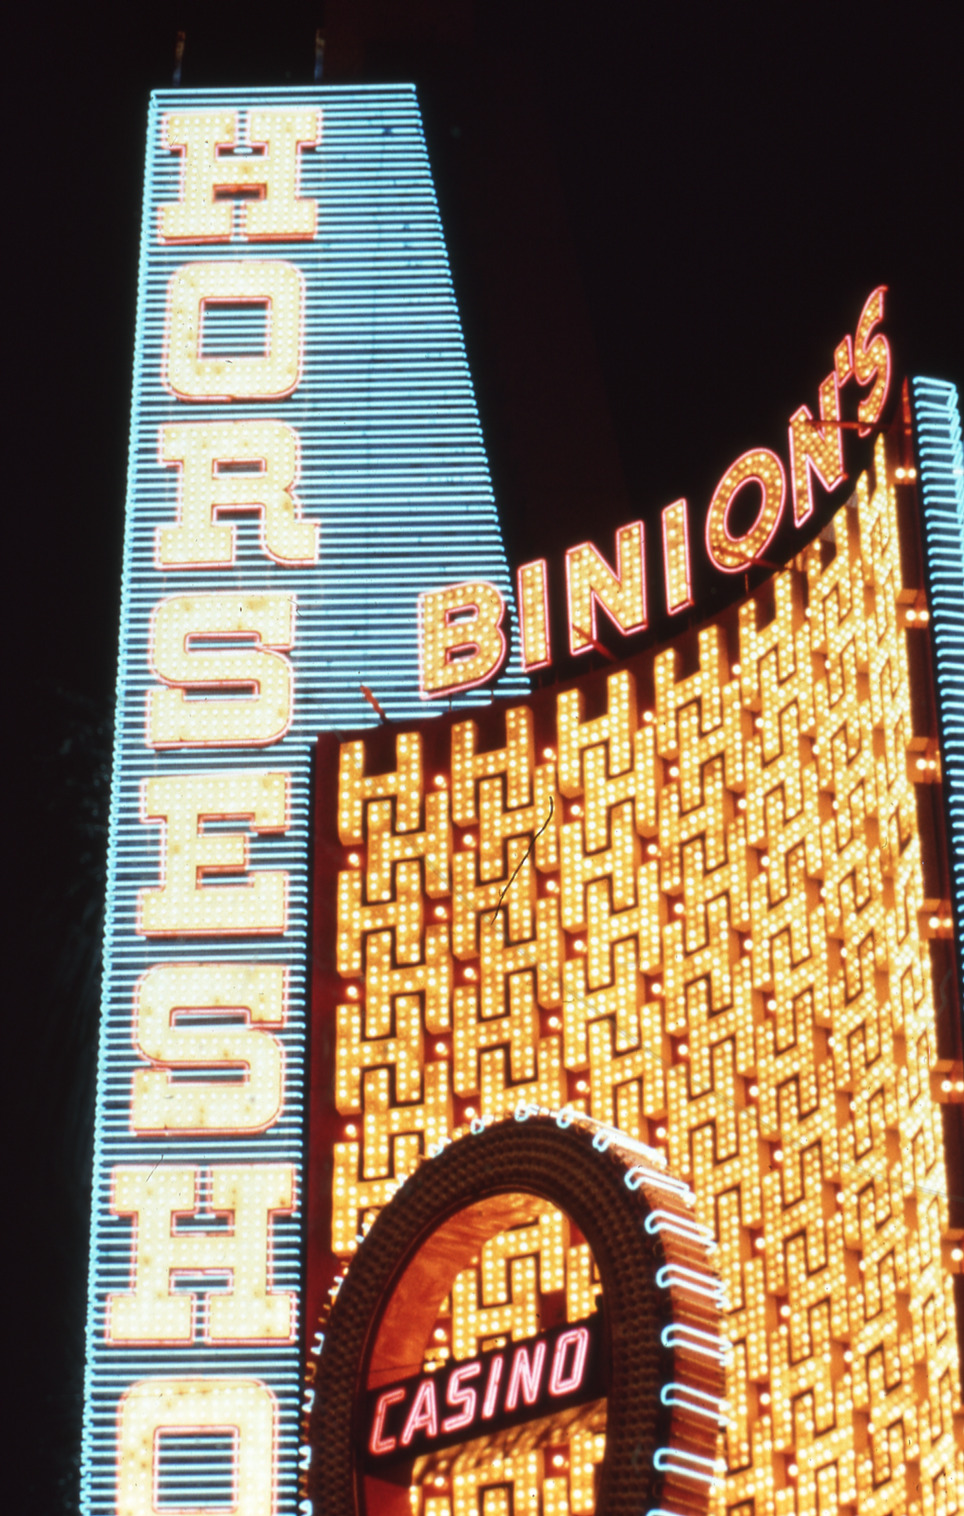 Horseshoe Casino lettering and wall signs, Las Vegas, Nevada: photographic print